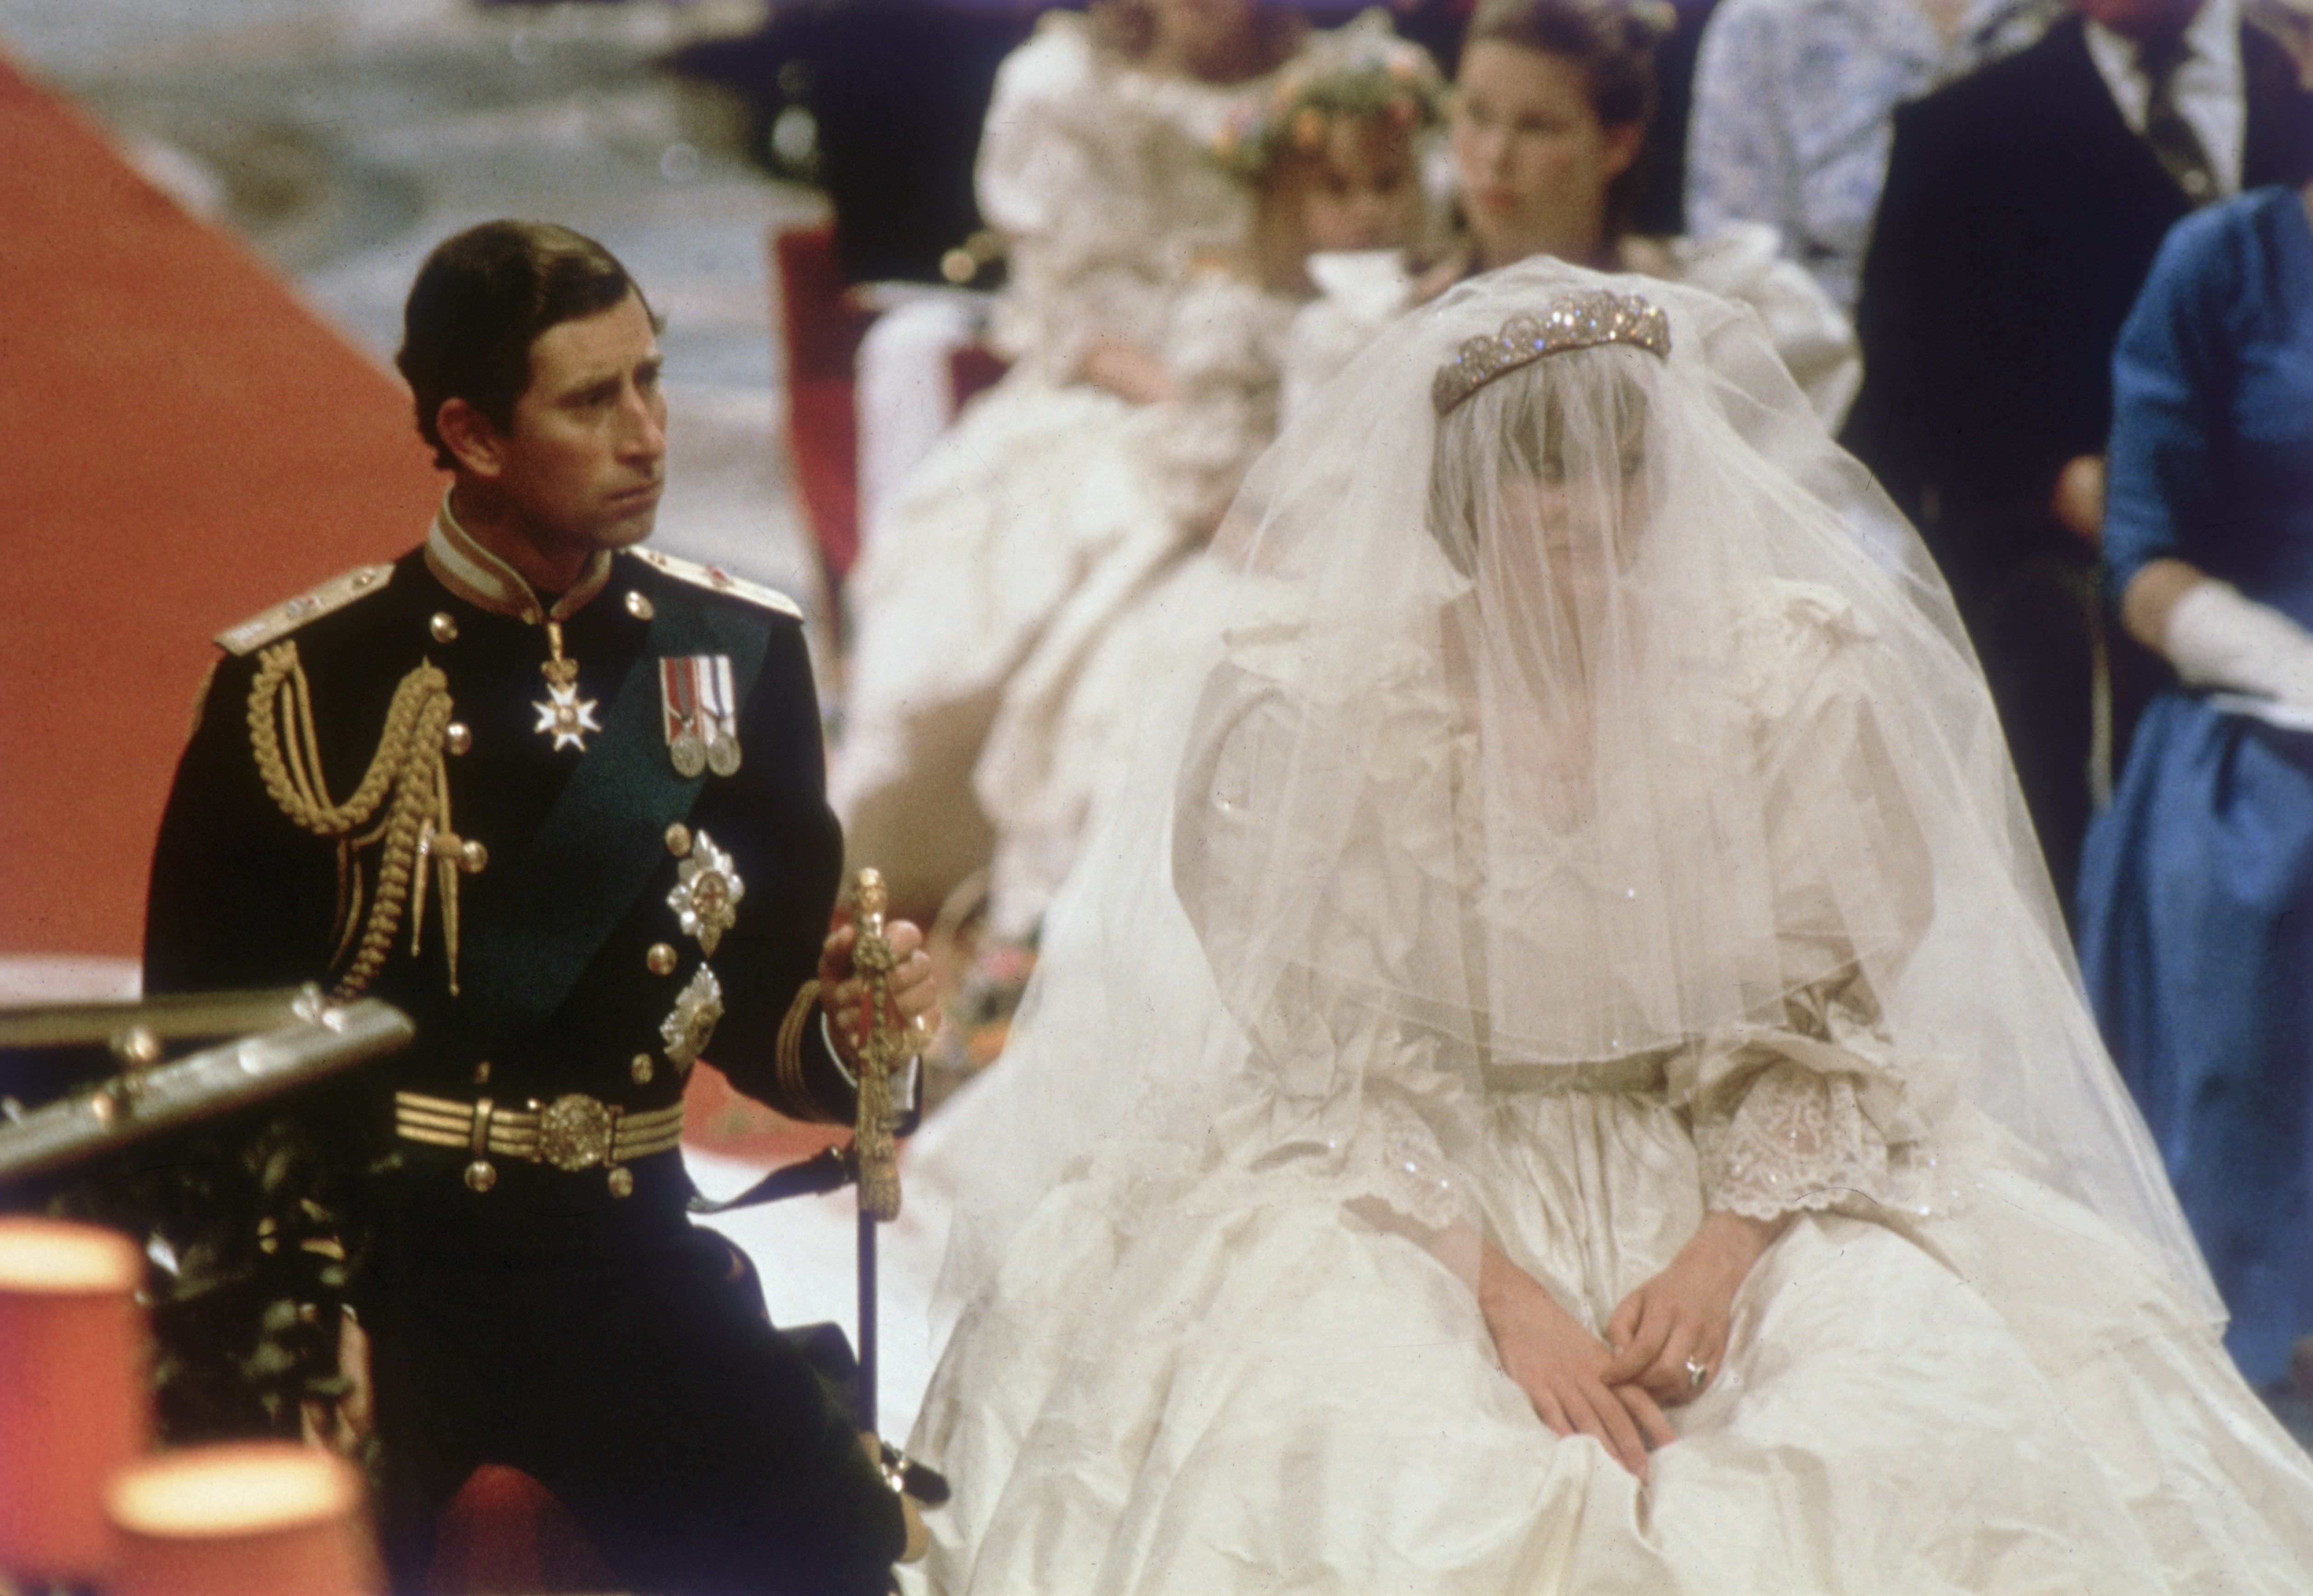 Princess Diana and Prince Charles on their wedding day in London 1981. | Source: Getty Images